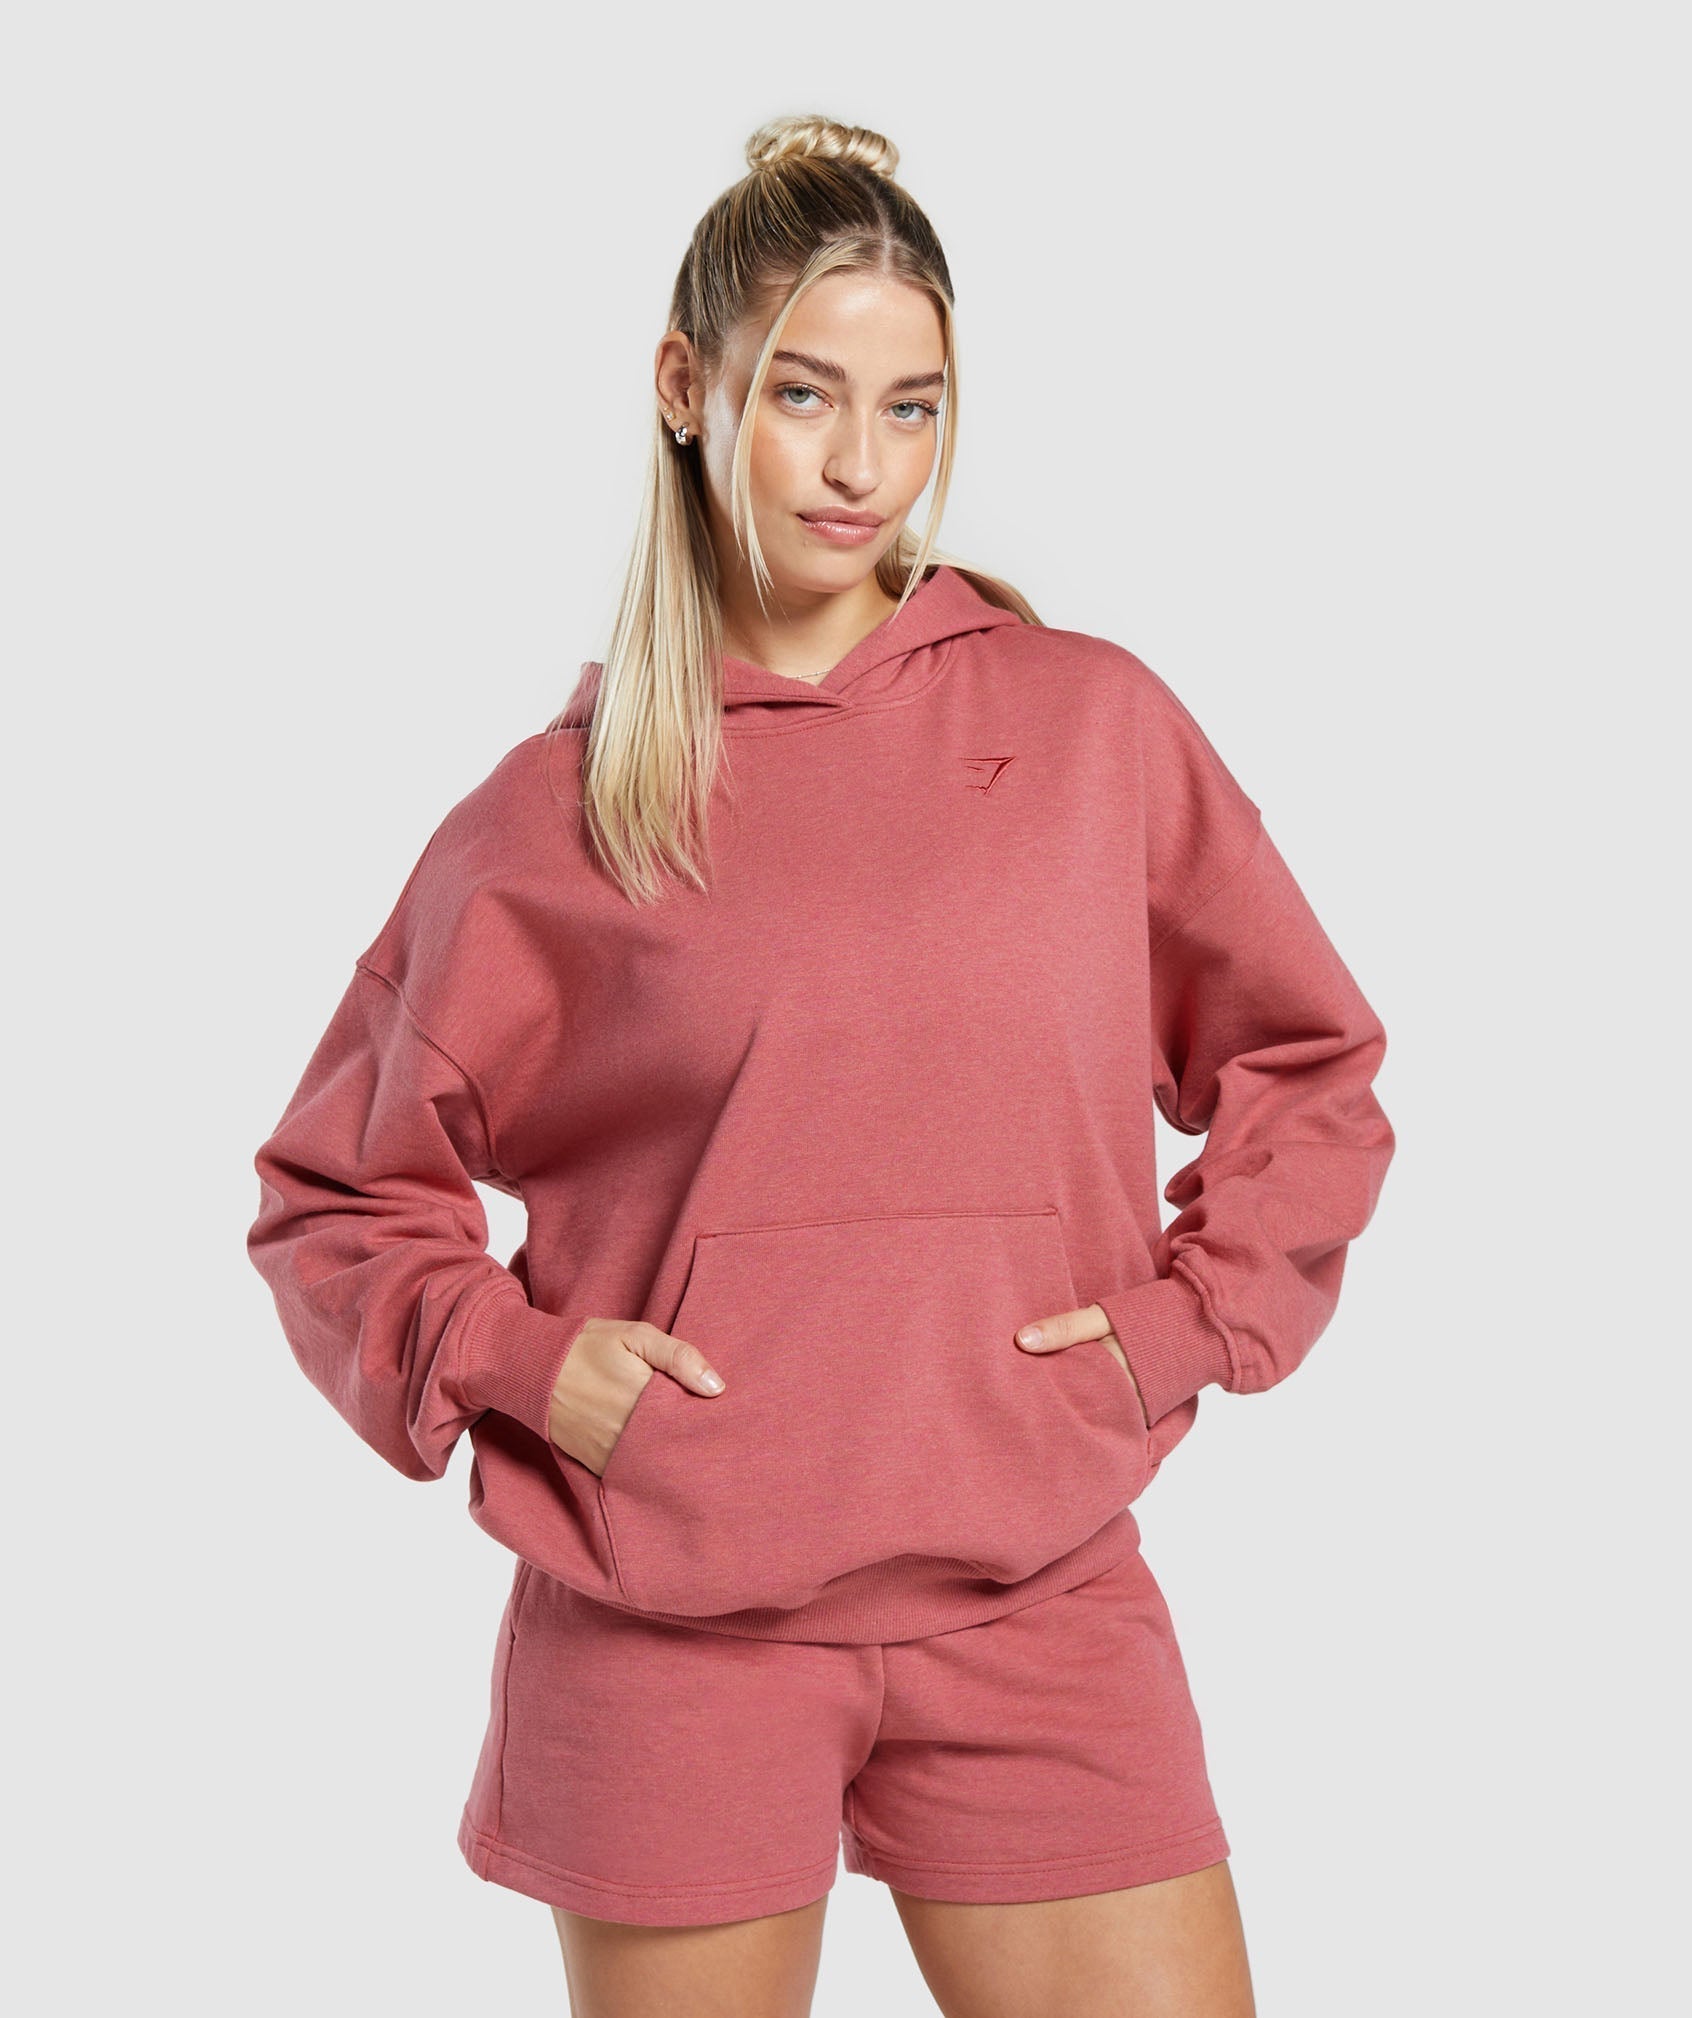 Rest Day Sweats Hoodie in {{variantColor} is out of stock